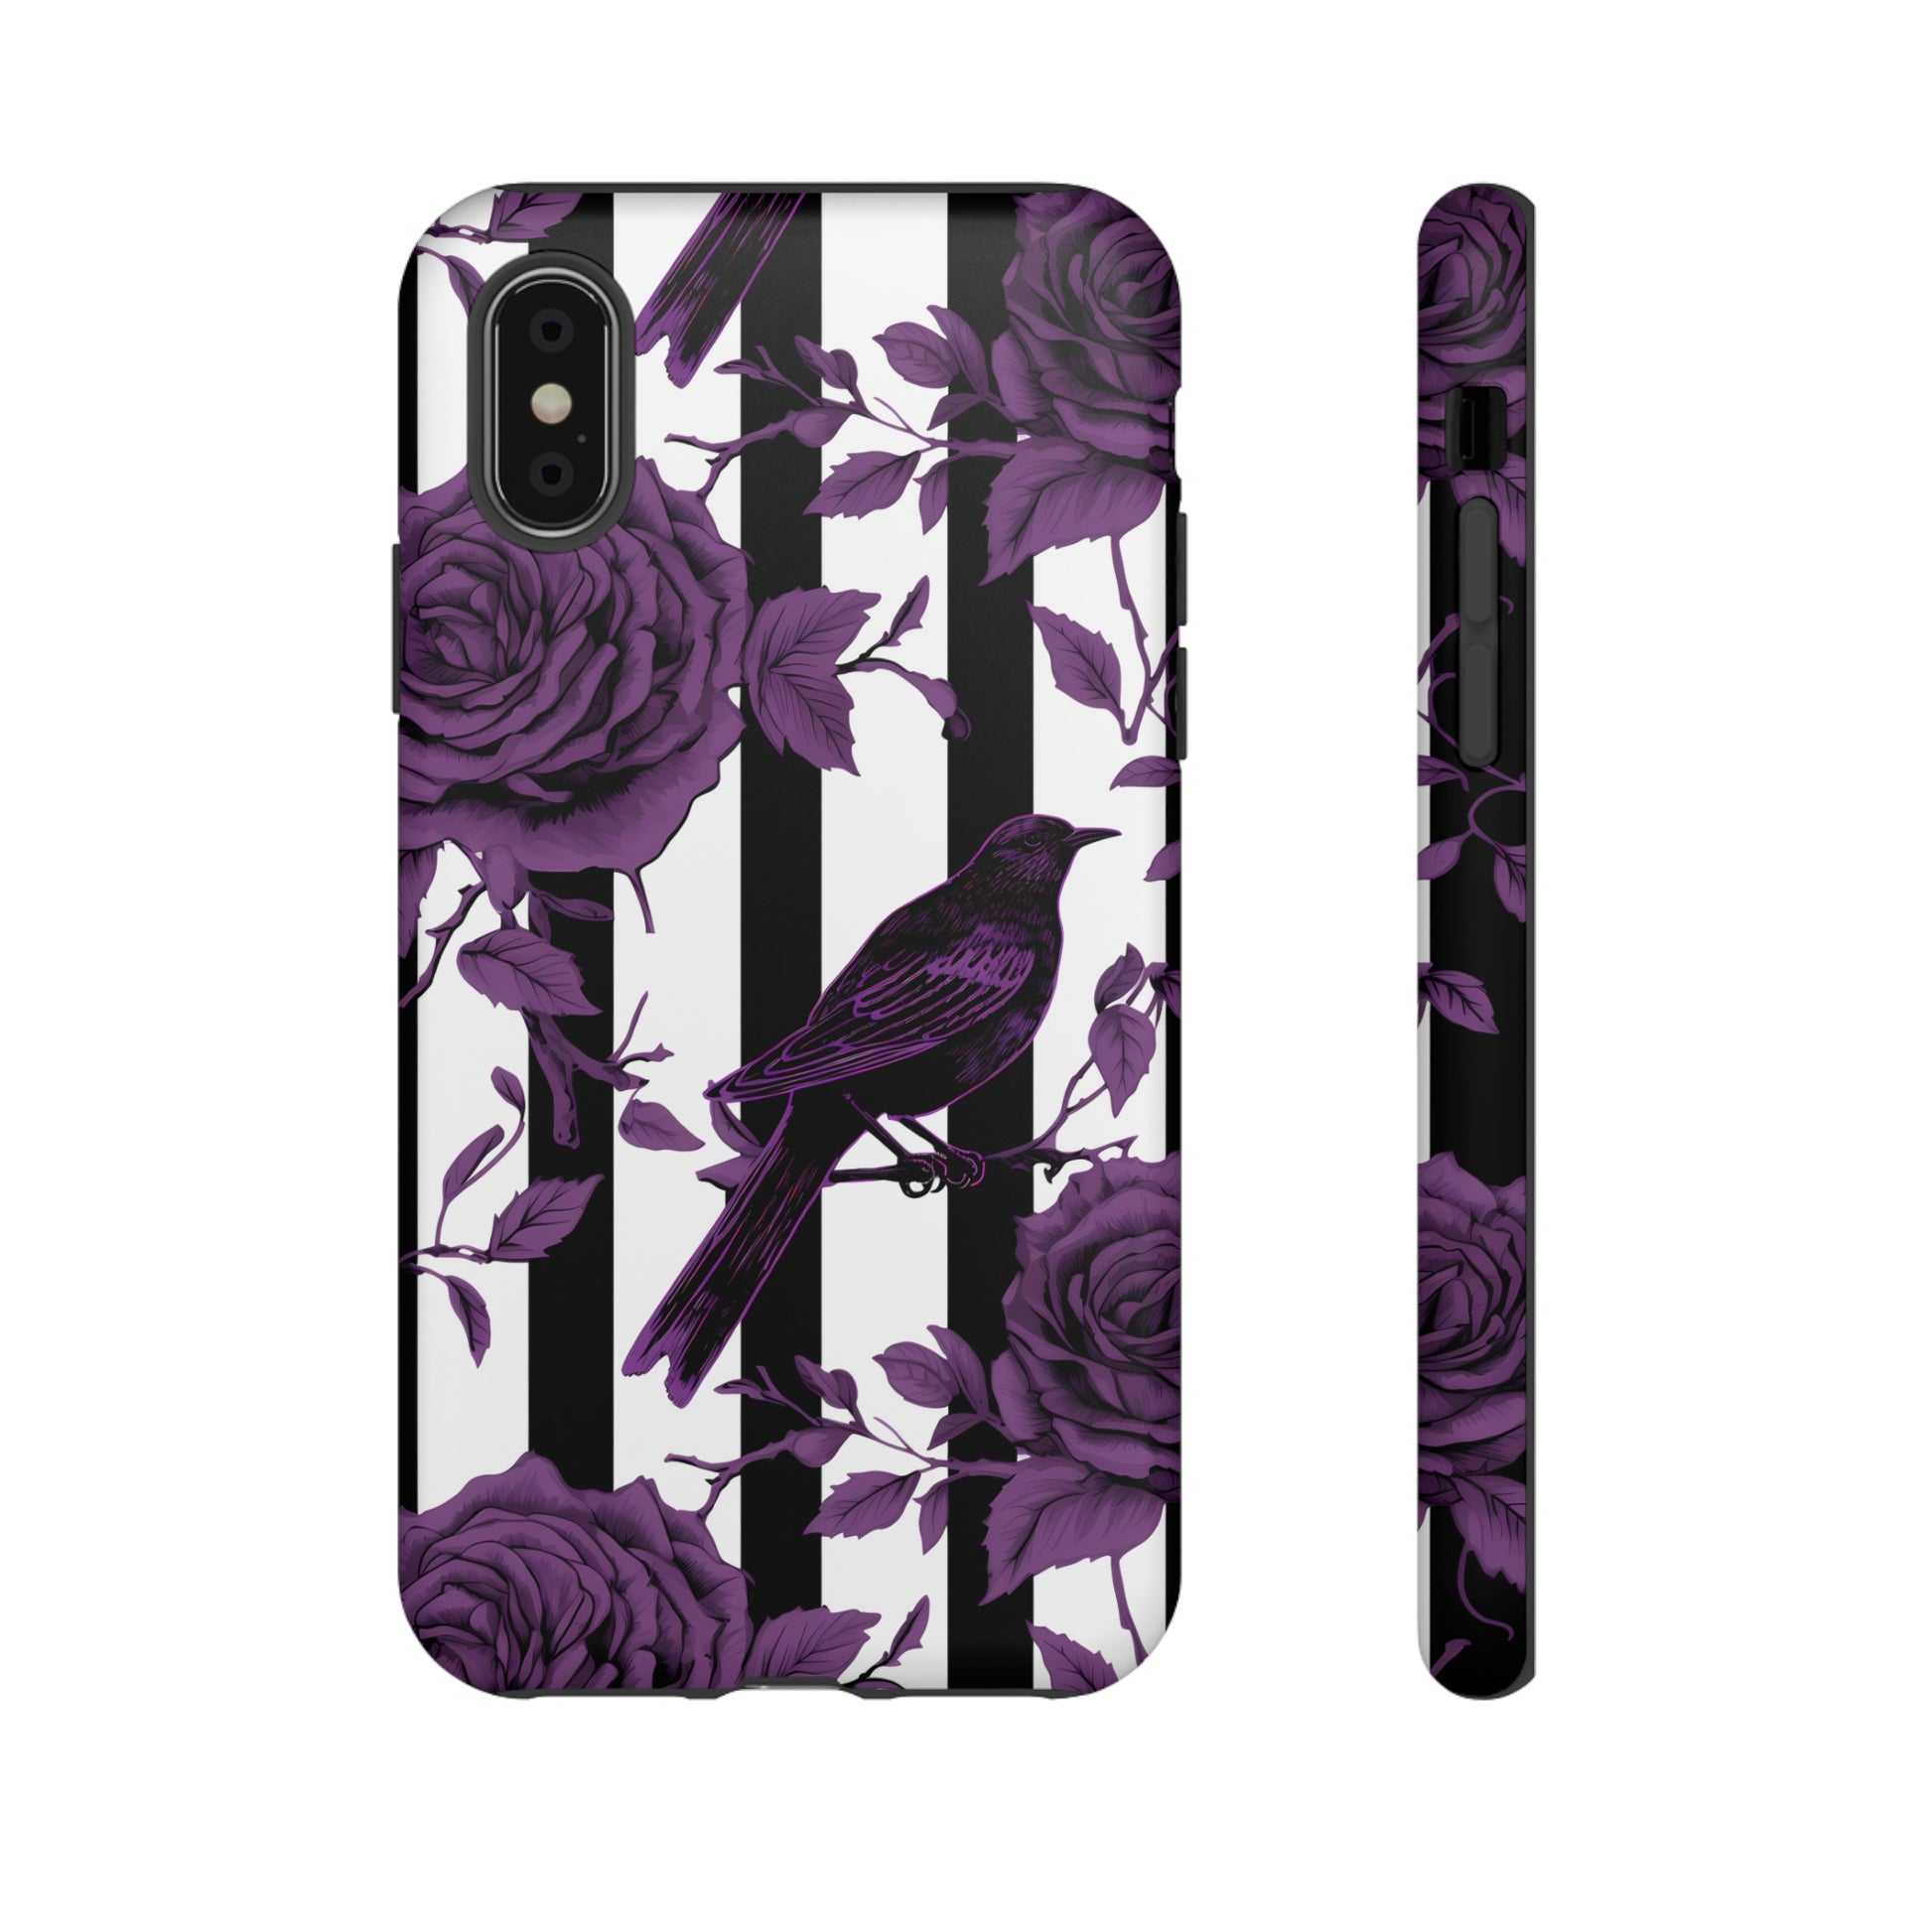 Striped Crows and Roses Tough Cases for iPhone Samsung Google PhonesPhone CaseVTZdesignsiPhone XMatteAccessoriescrowsGlossy